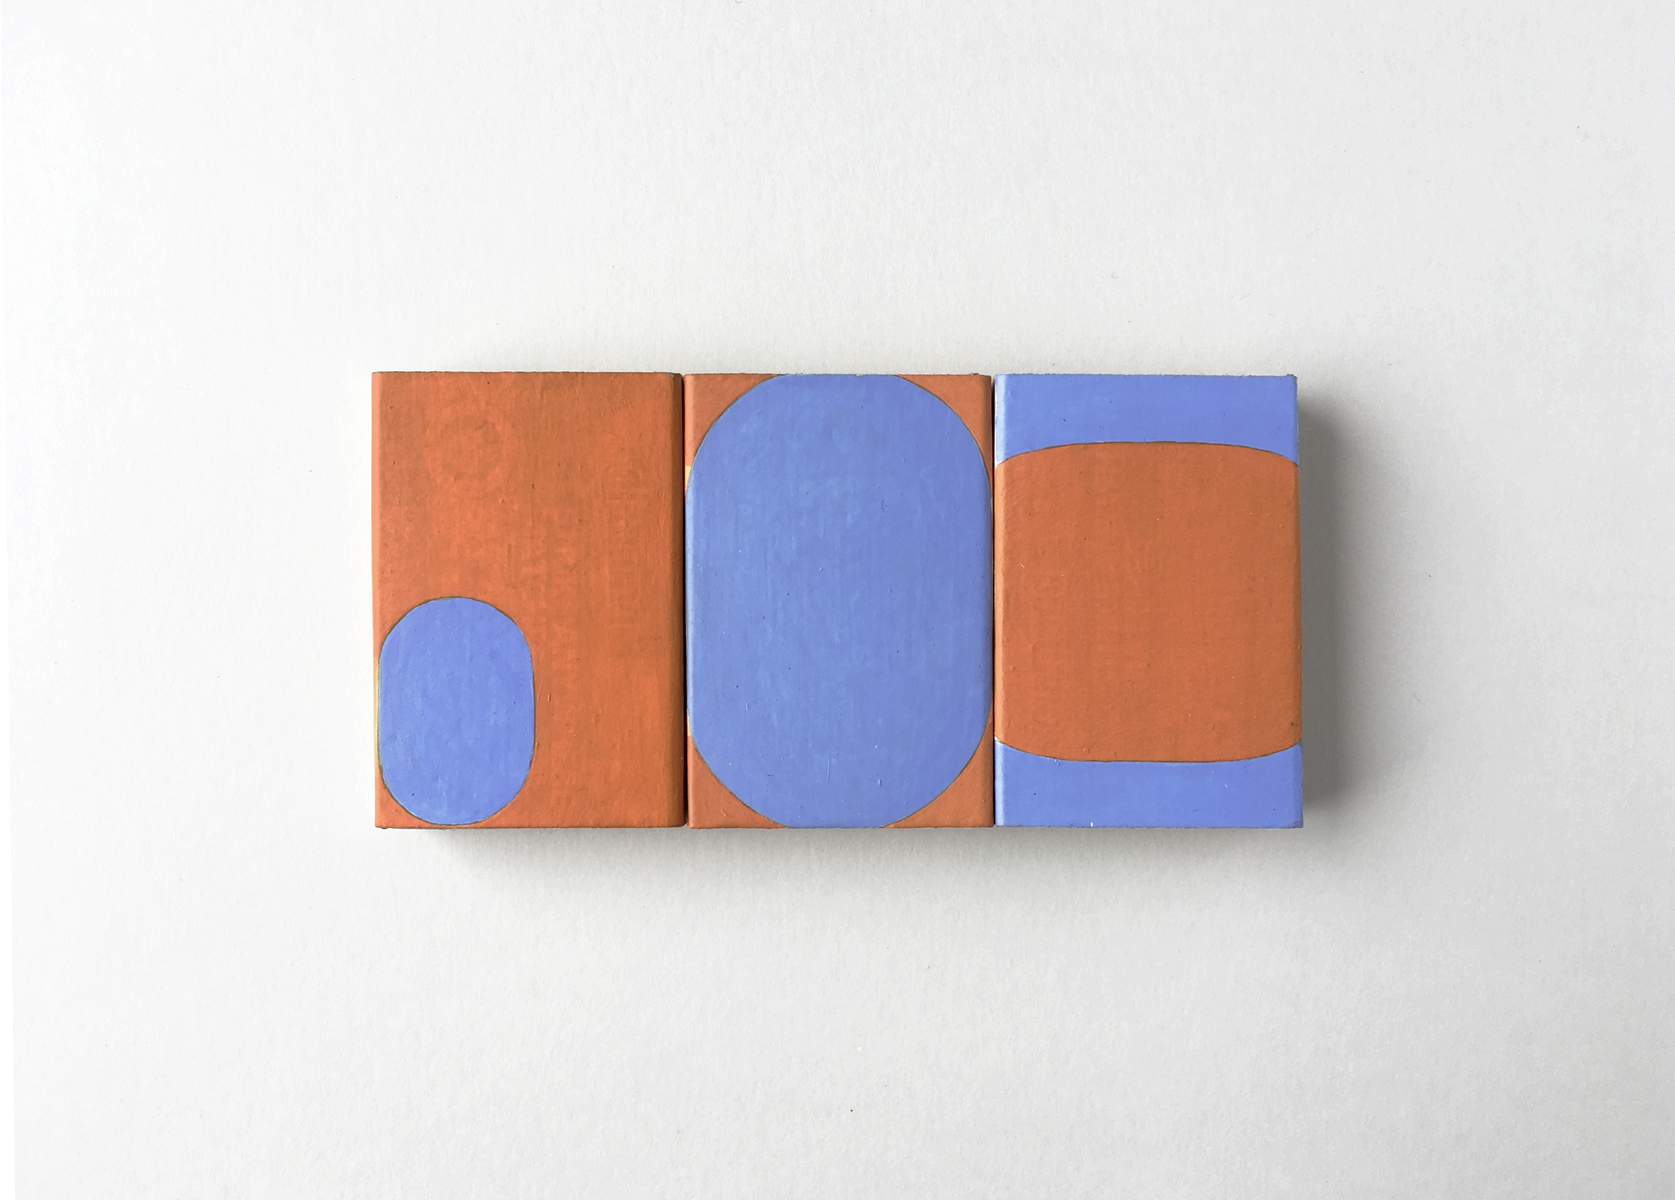 Three small matchboxes in a row with blue and orange ovals painted on them.